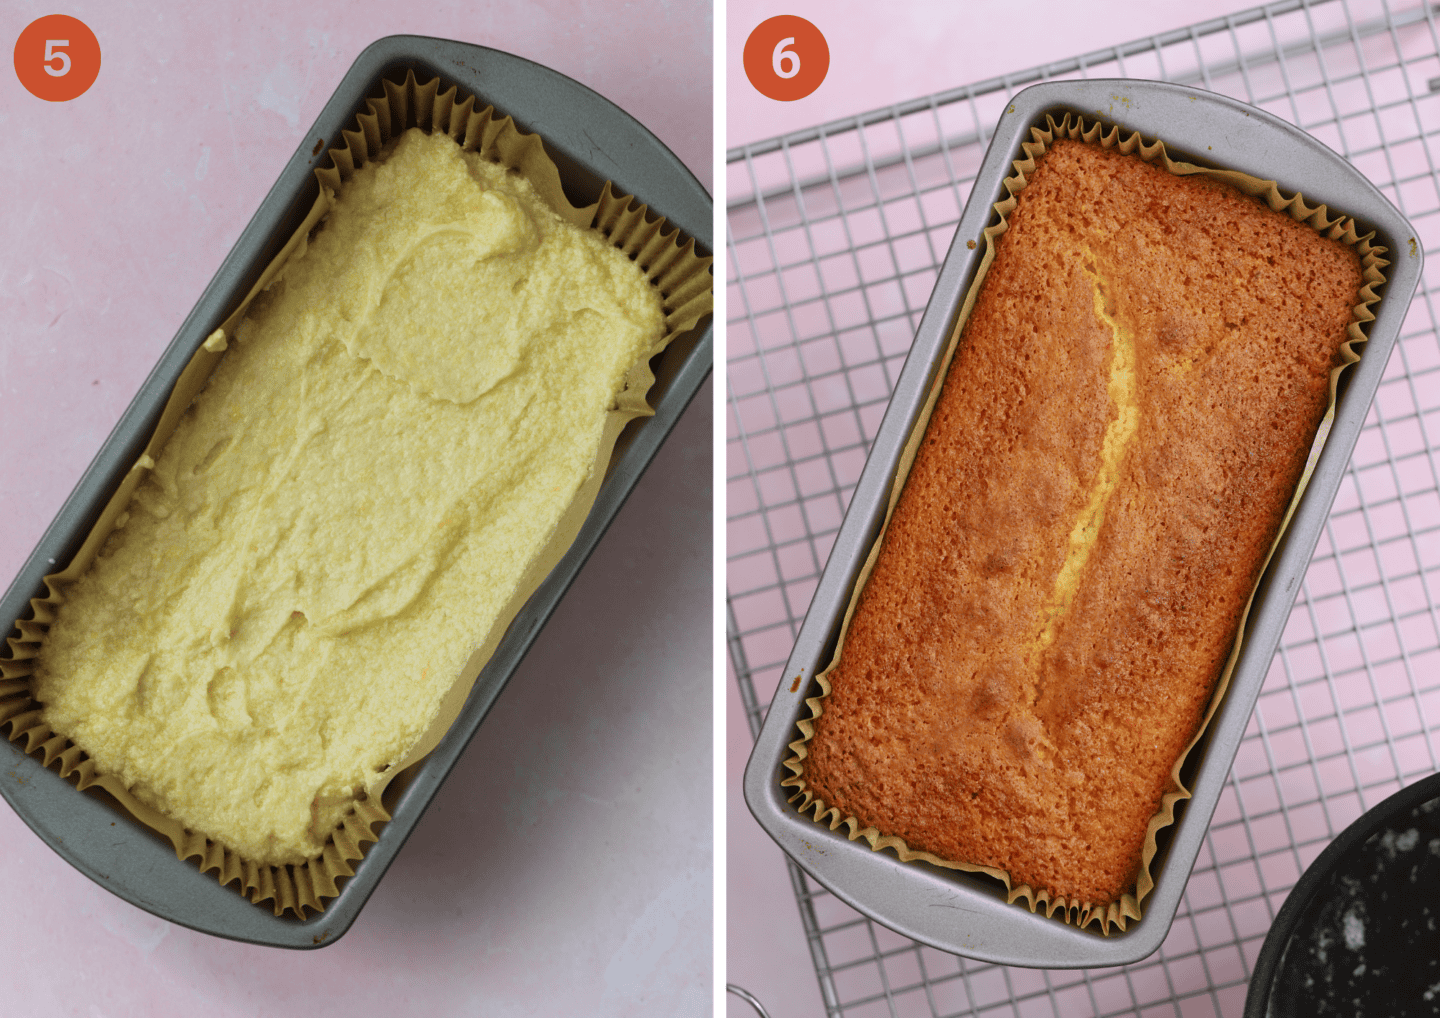 The lemon drizzle cake before (left) and after (right) baking.